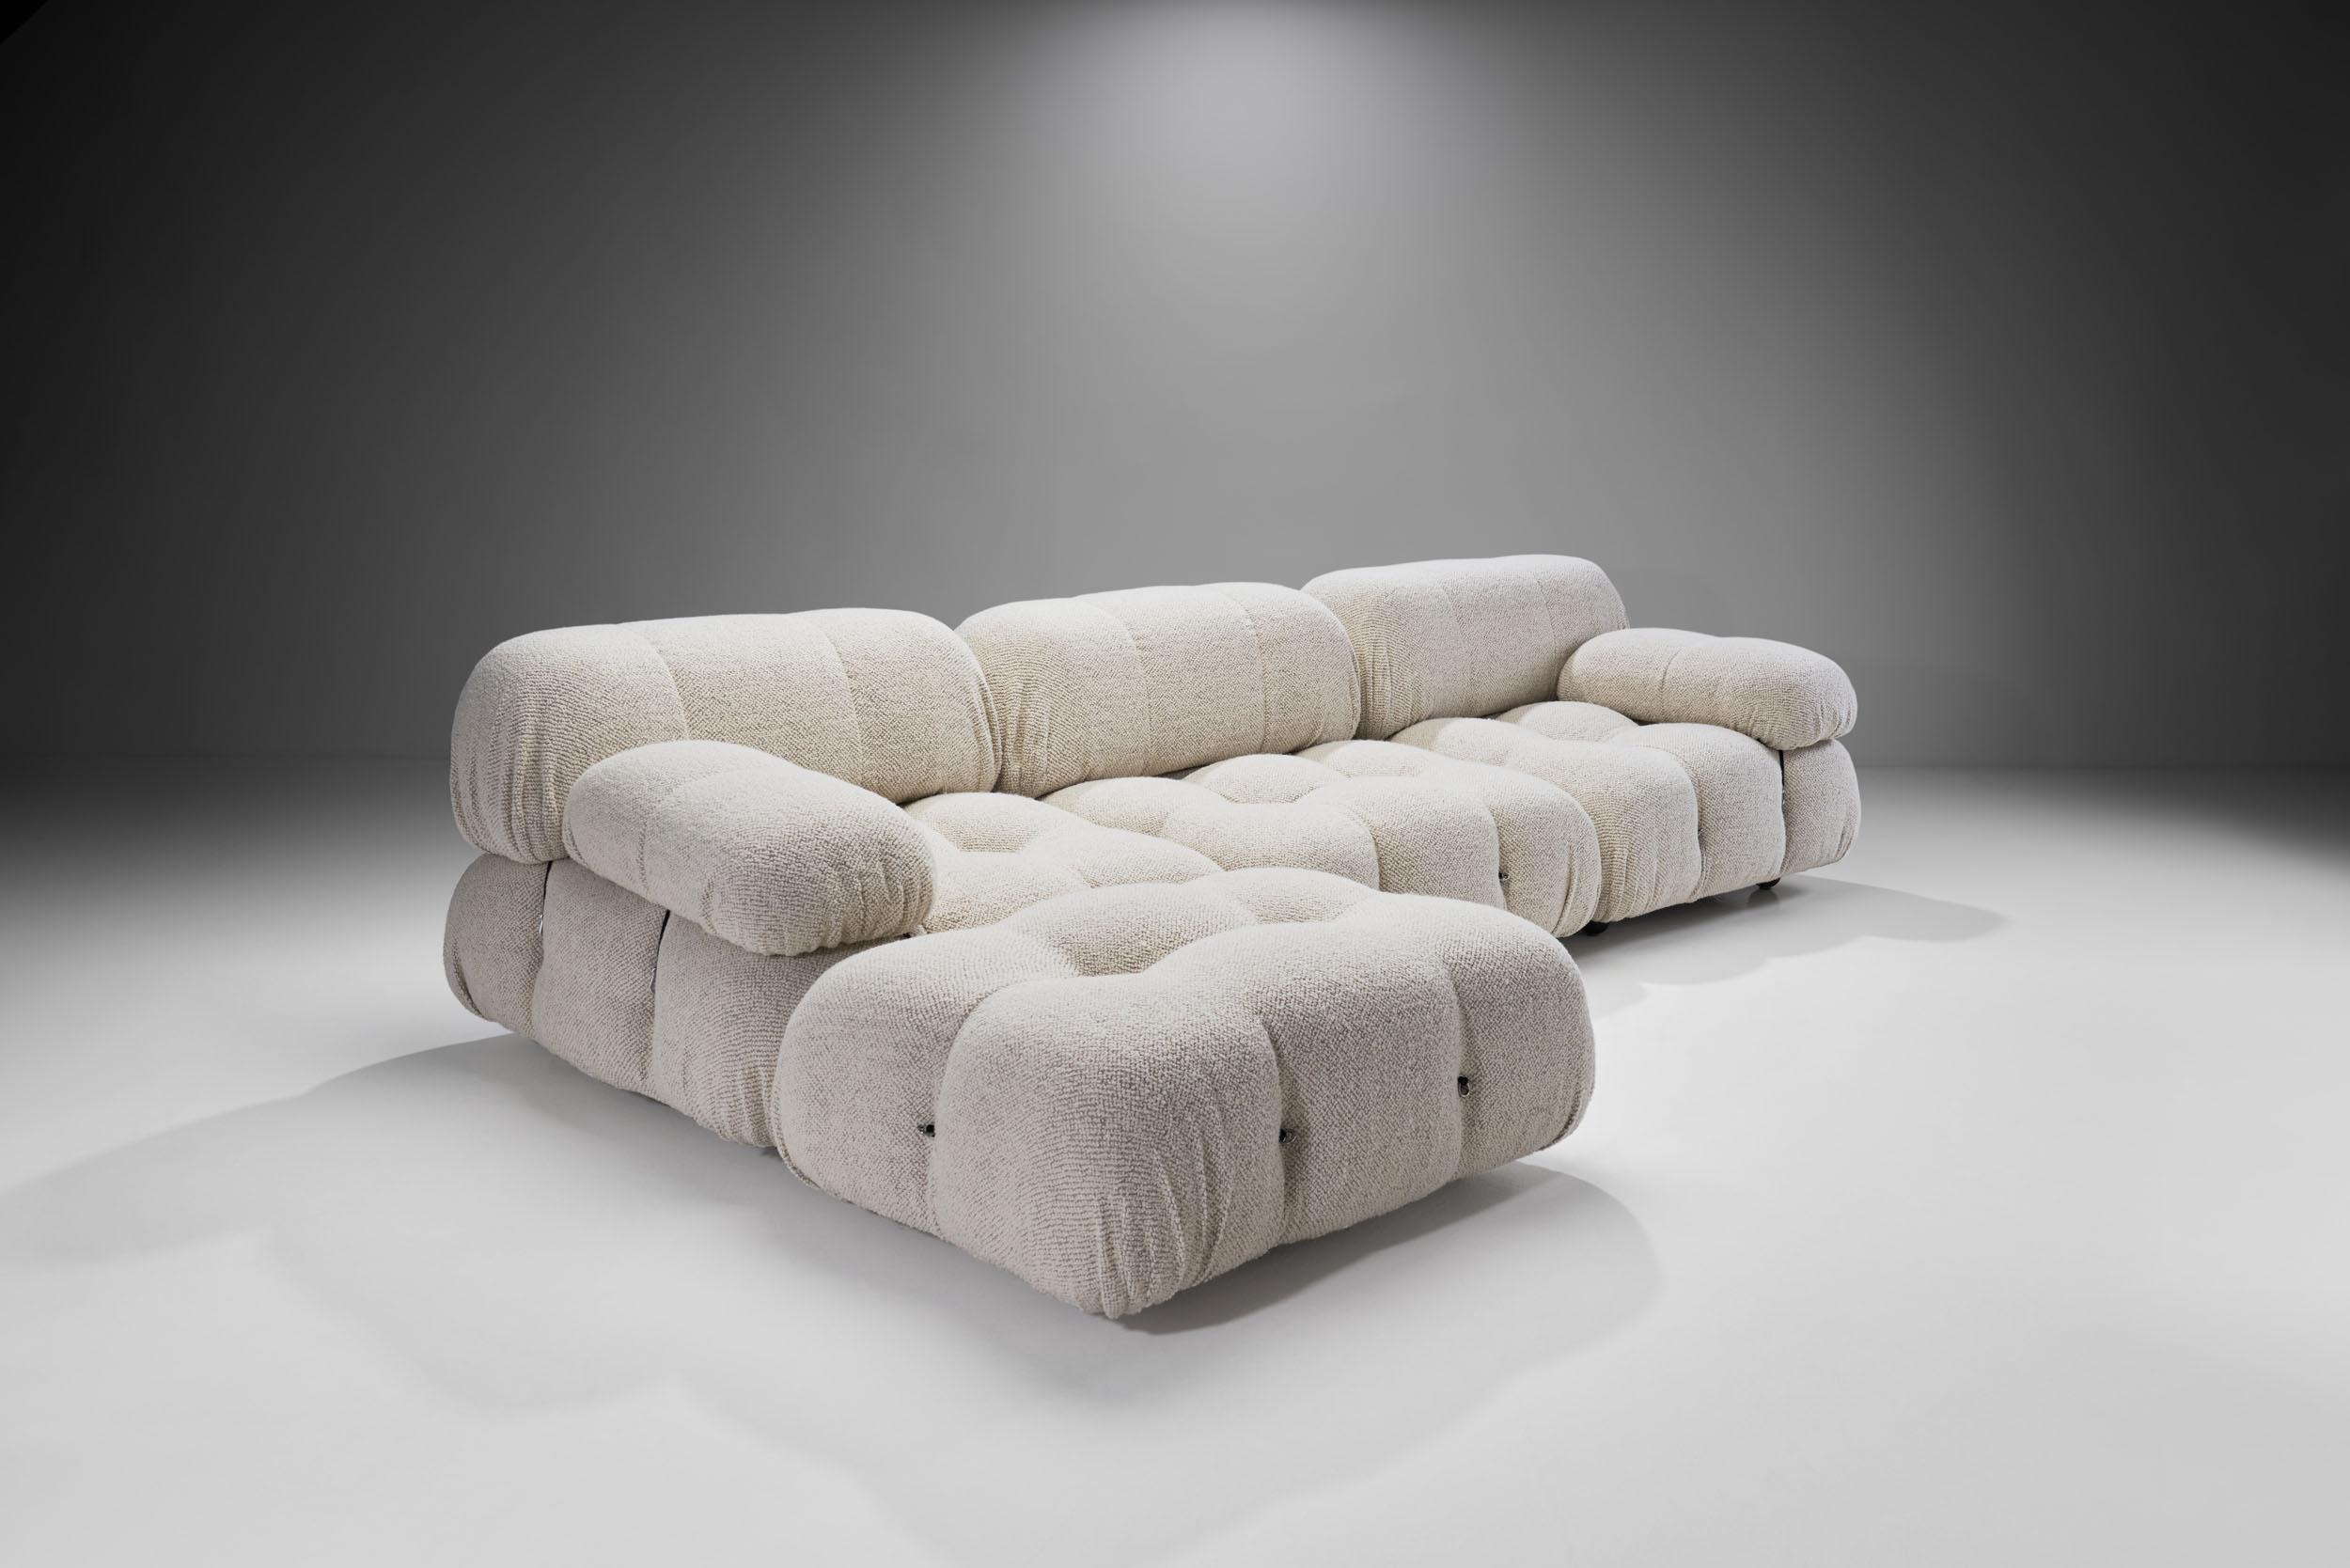 The “Camaleonda” (Chameleon) sofa is Mario Bellini’s contemporary classic. The playful, modular design offers endless options for the user, which also inspired the model’s name. Camaleonda has passed through 5 decades of design history as a true